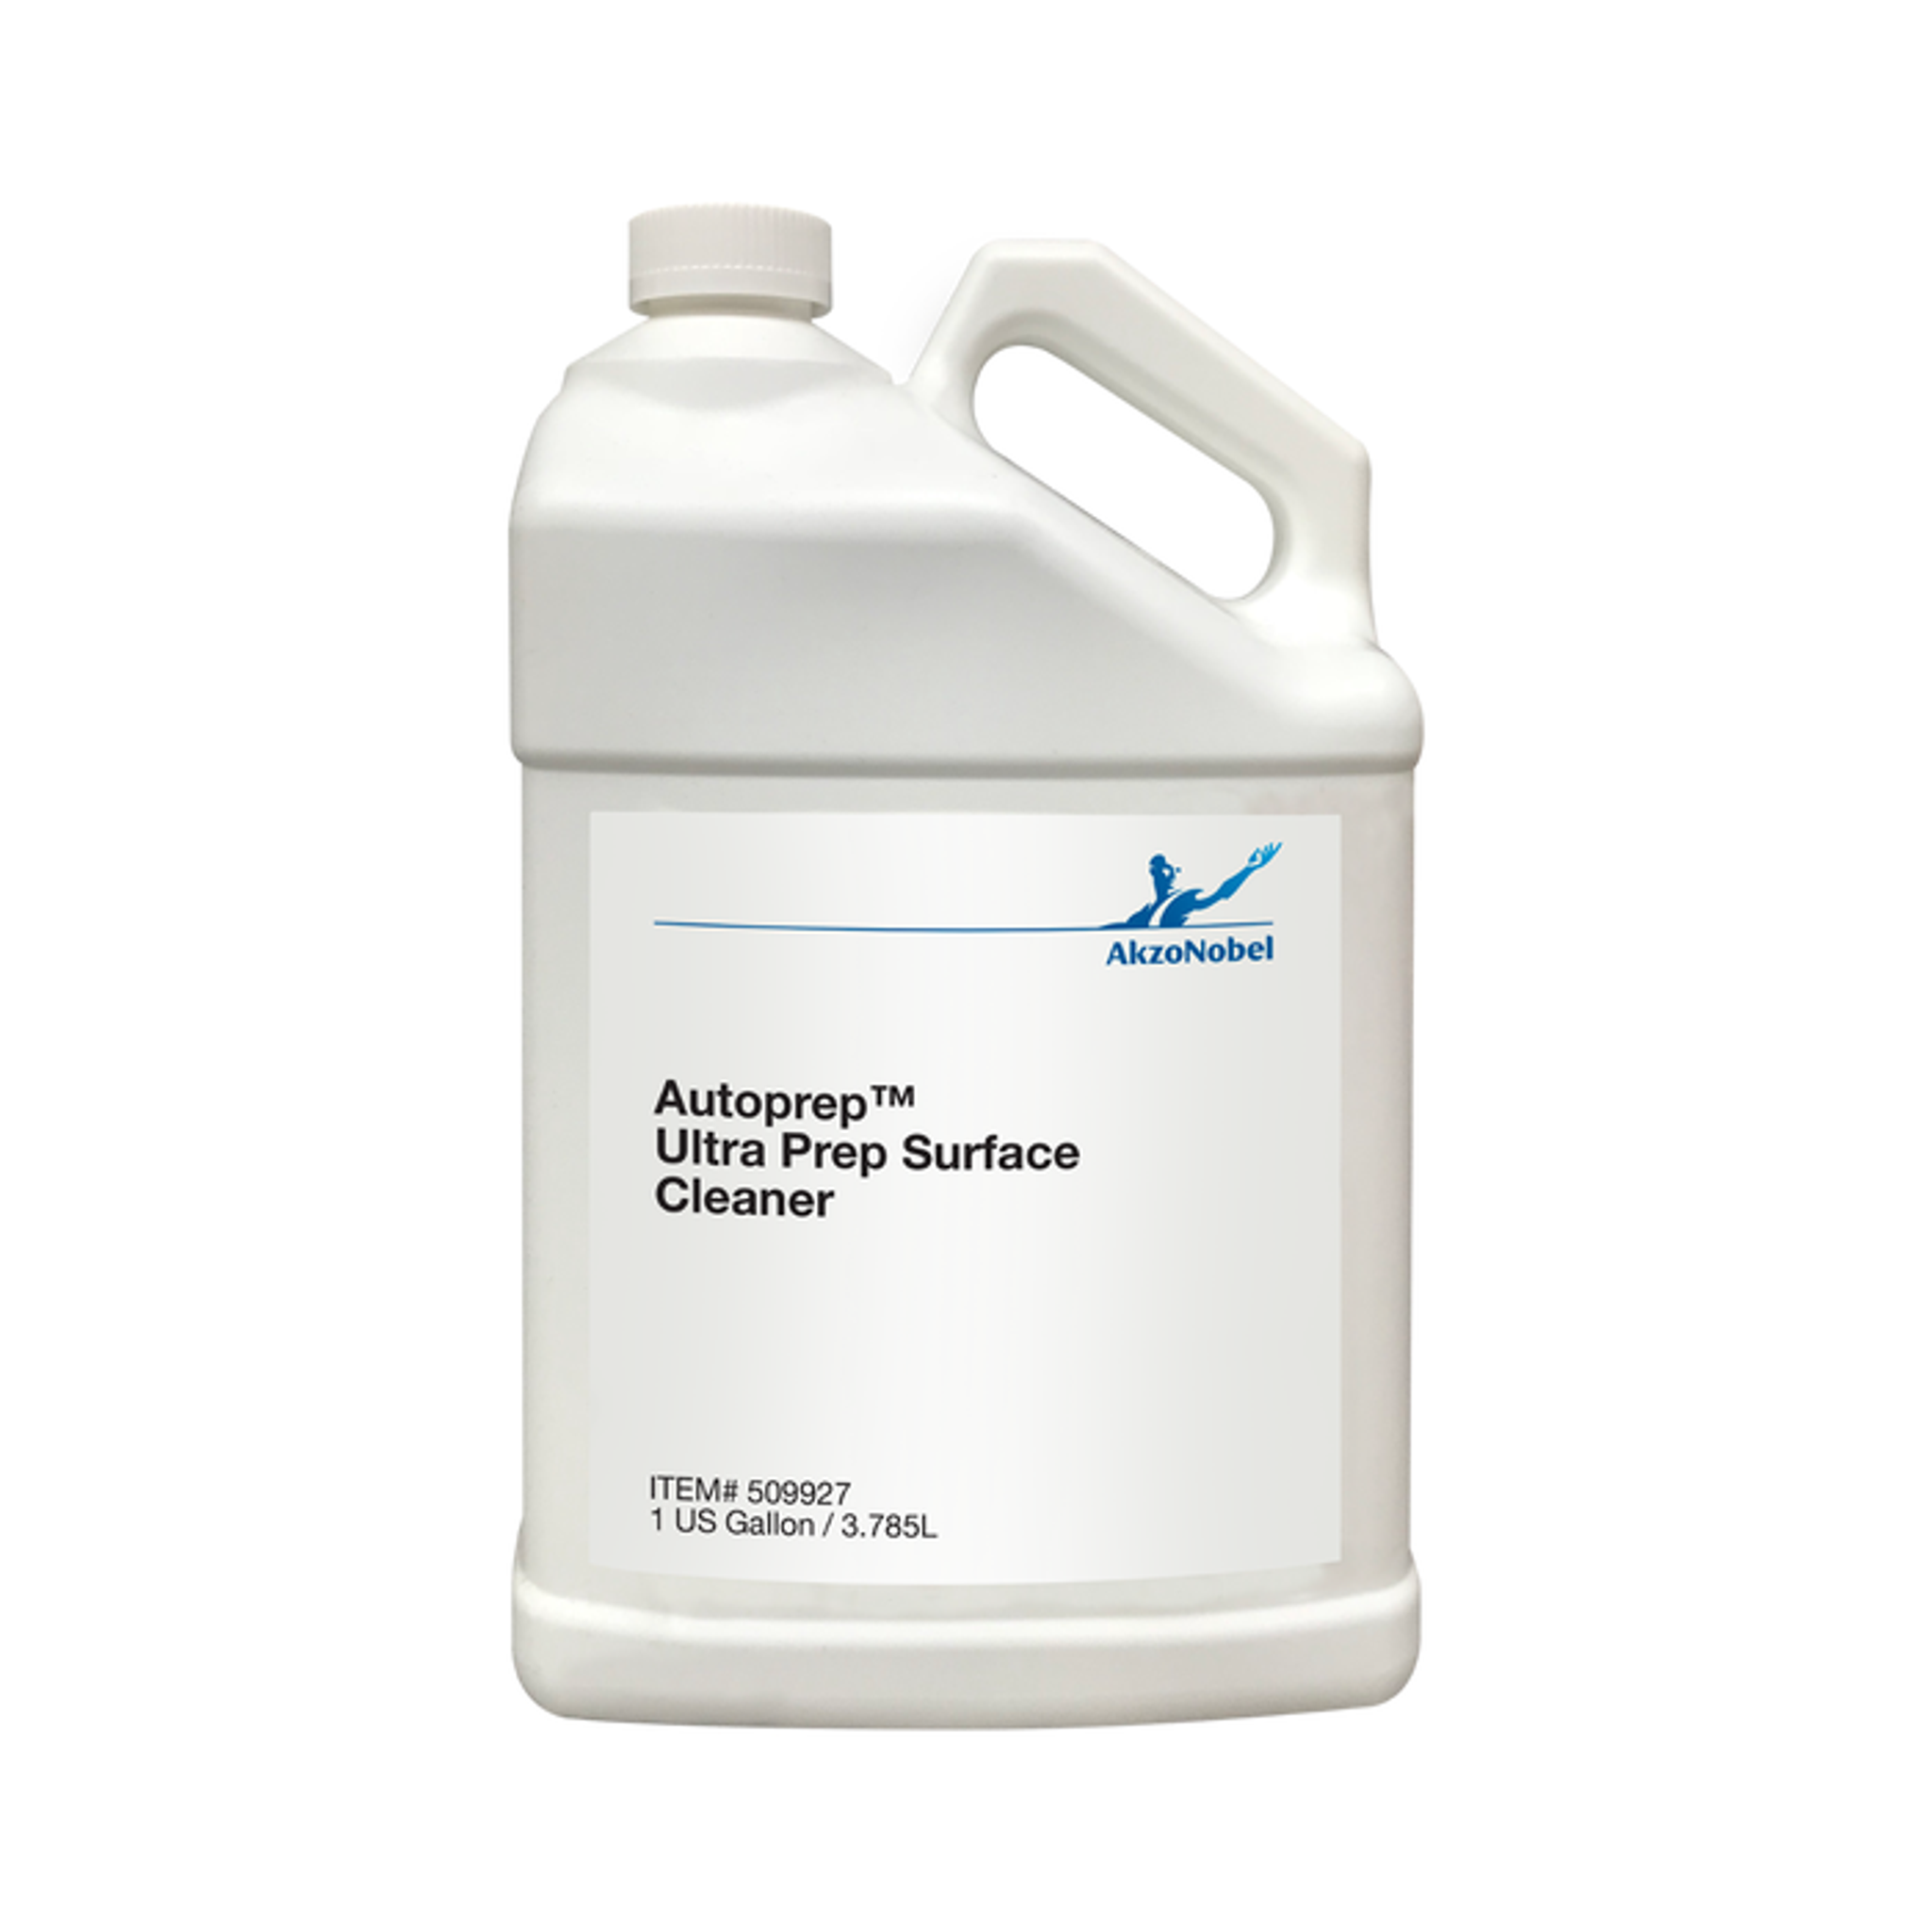 AUTOPREP ULTRA PREP SURFACE CLEANER